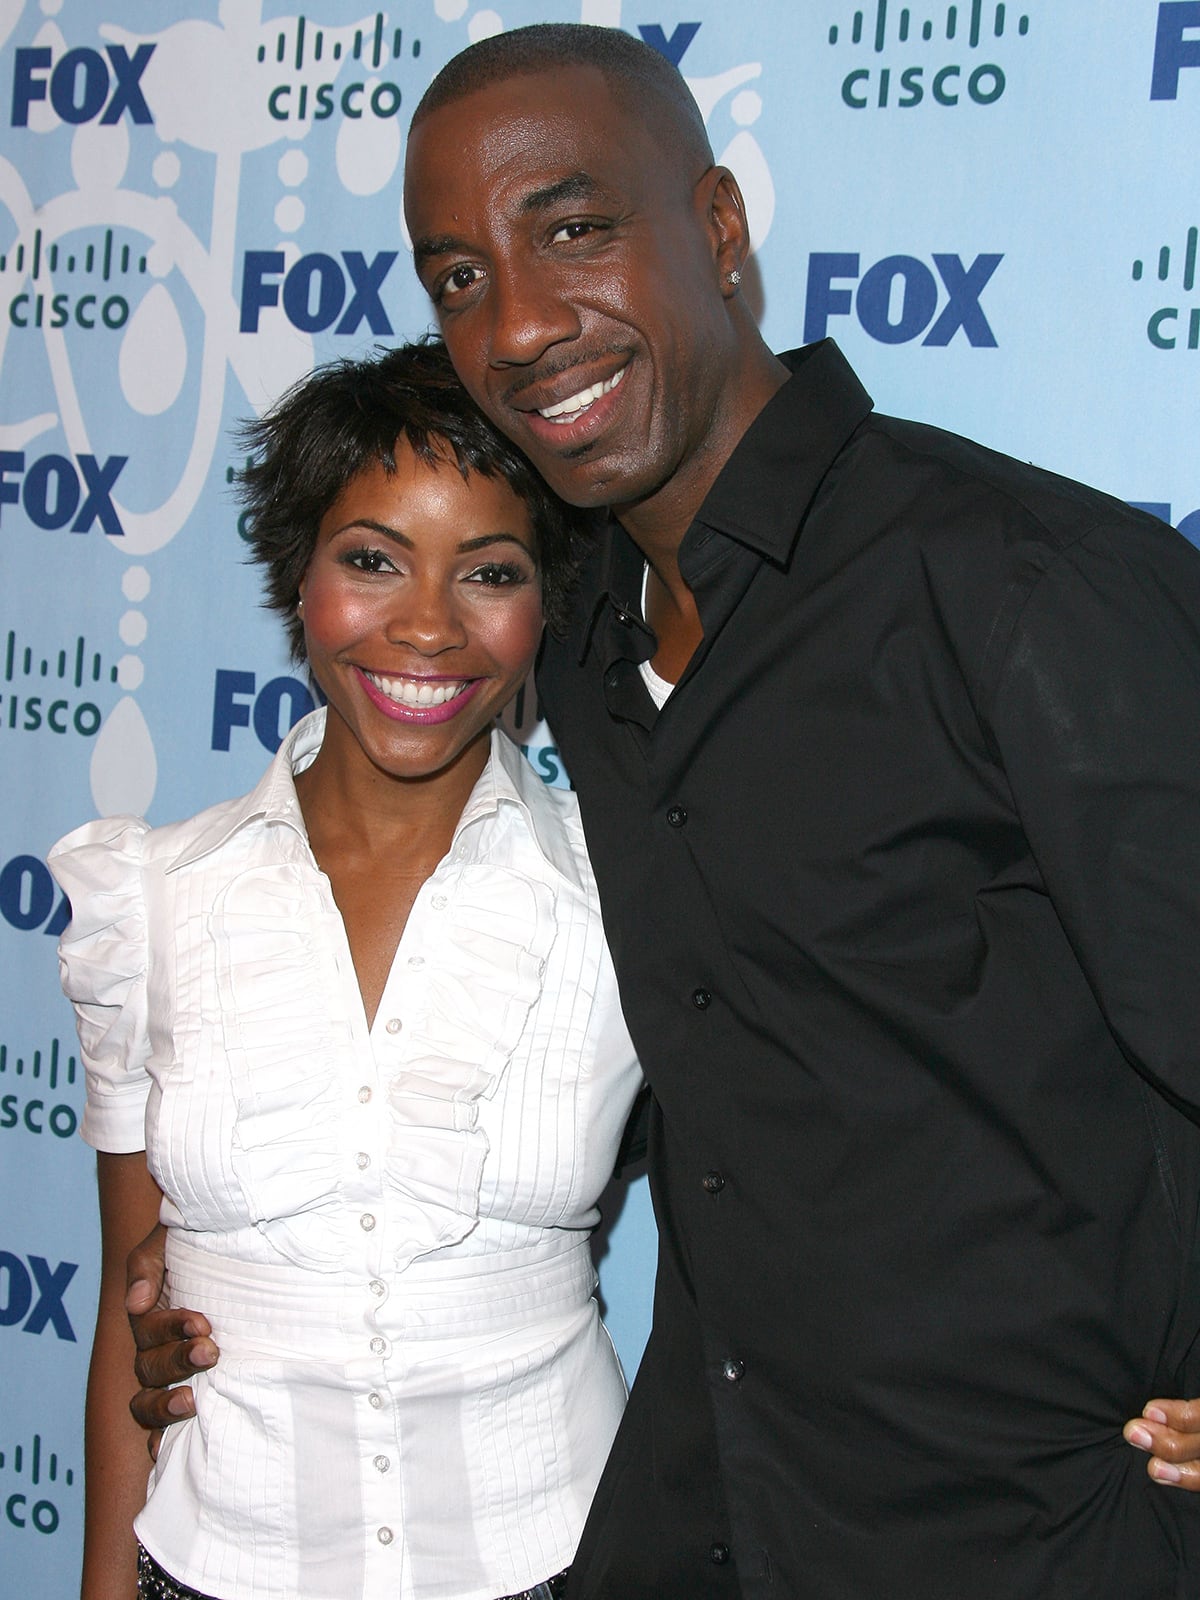 JB Smoove reveals a flirtatious exchange between him and Shahidah Omar at a restaurant during their first meeting